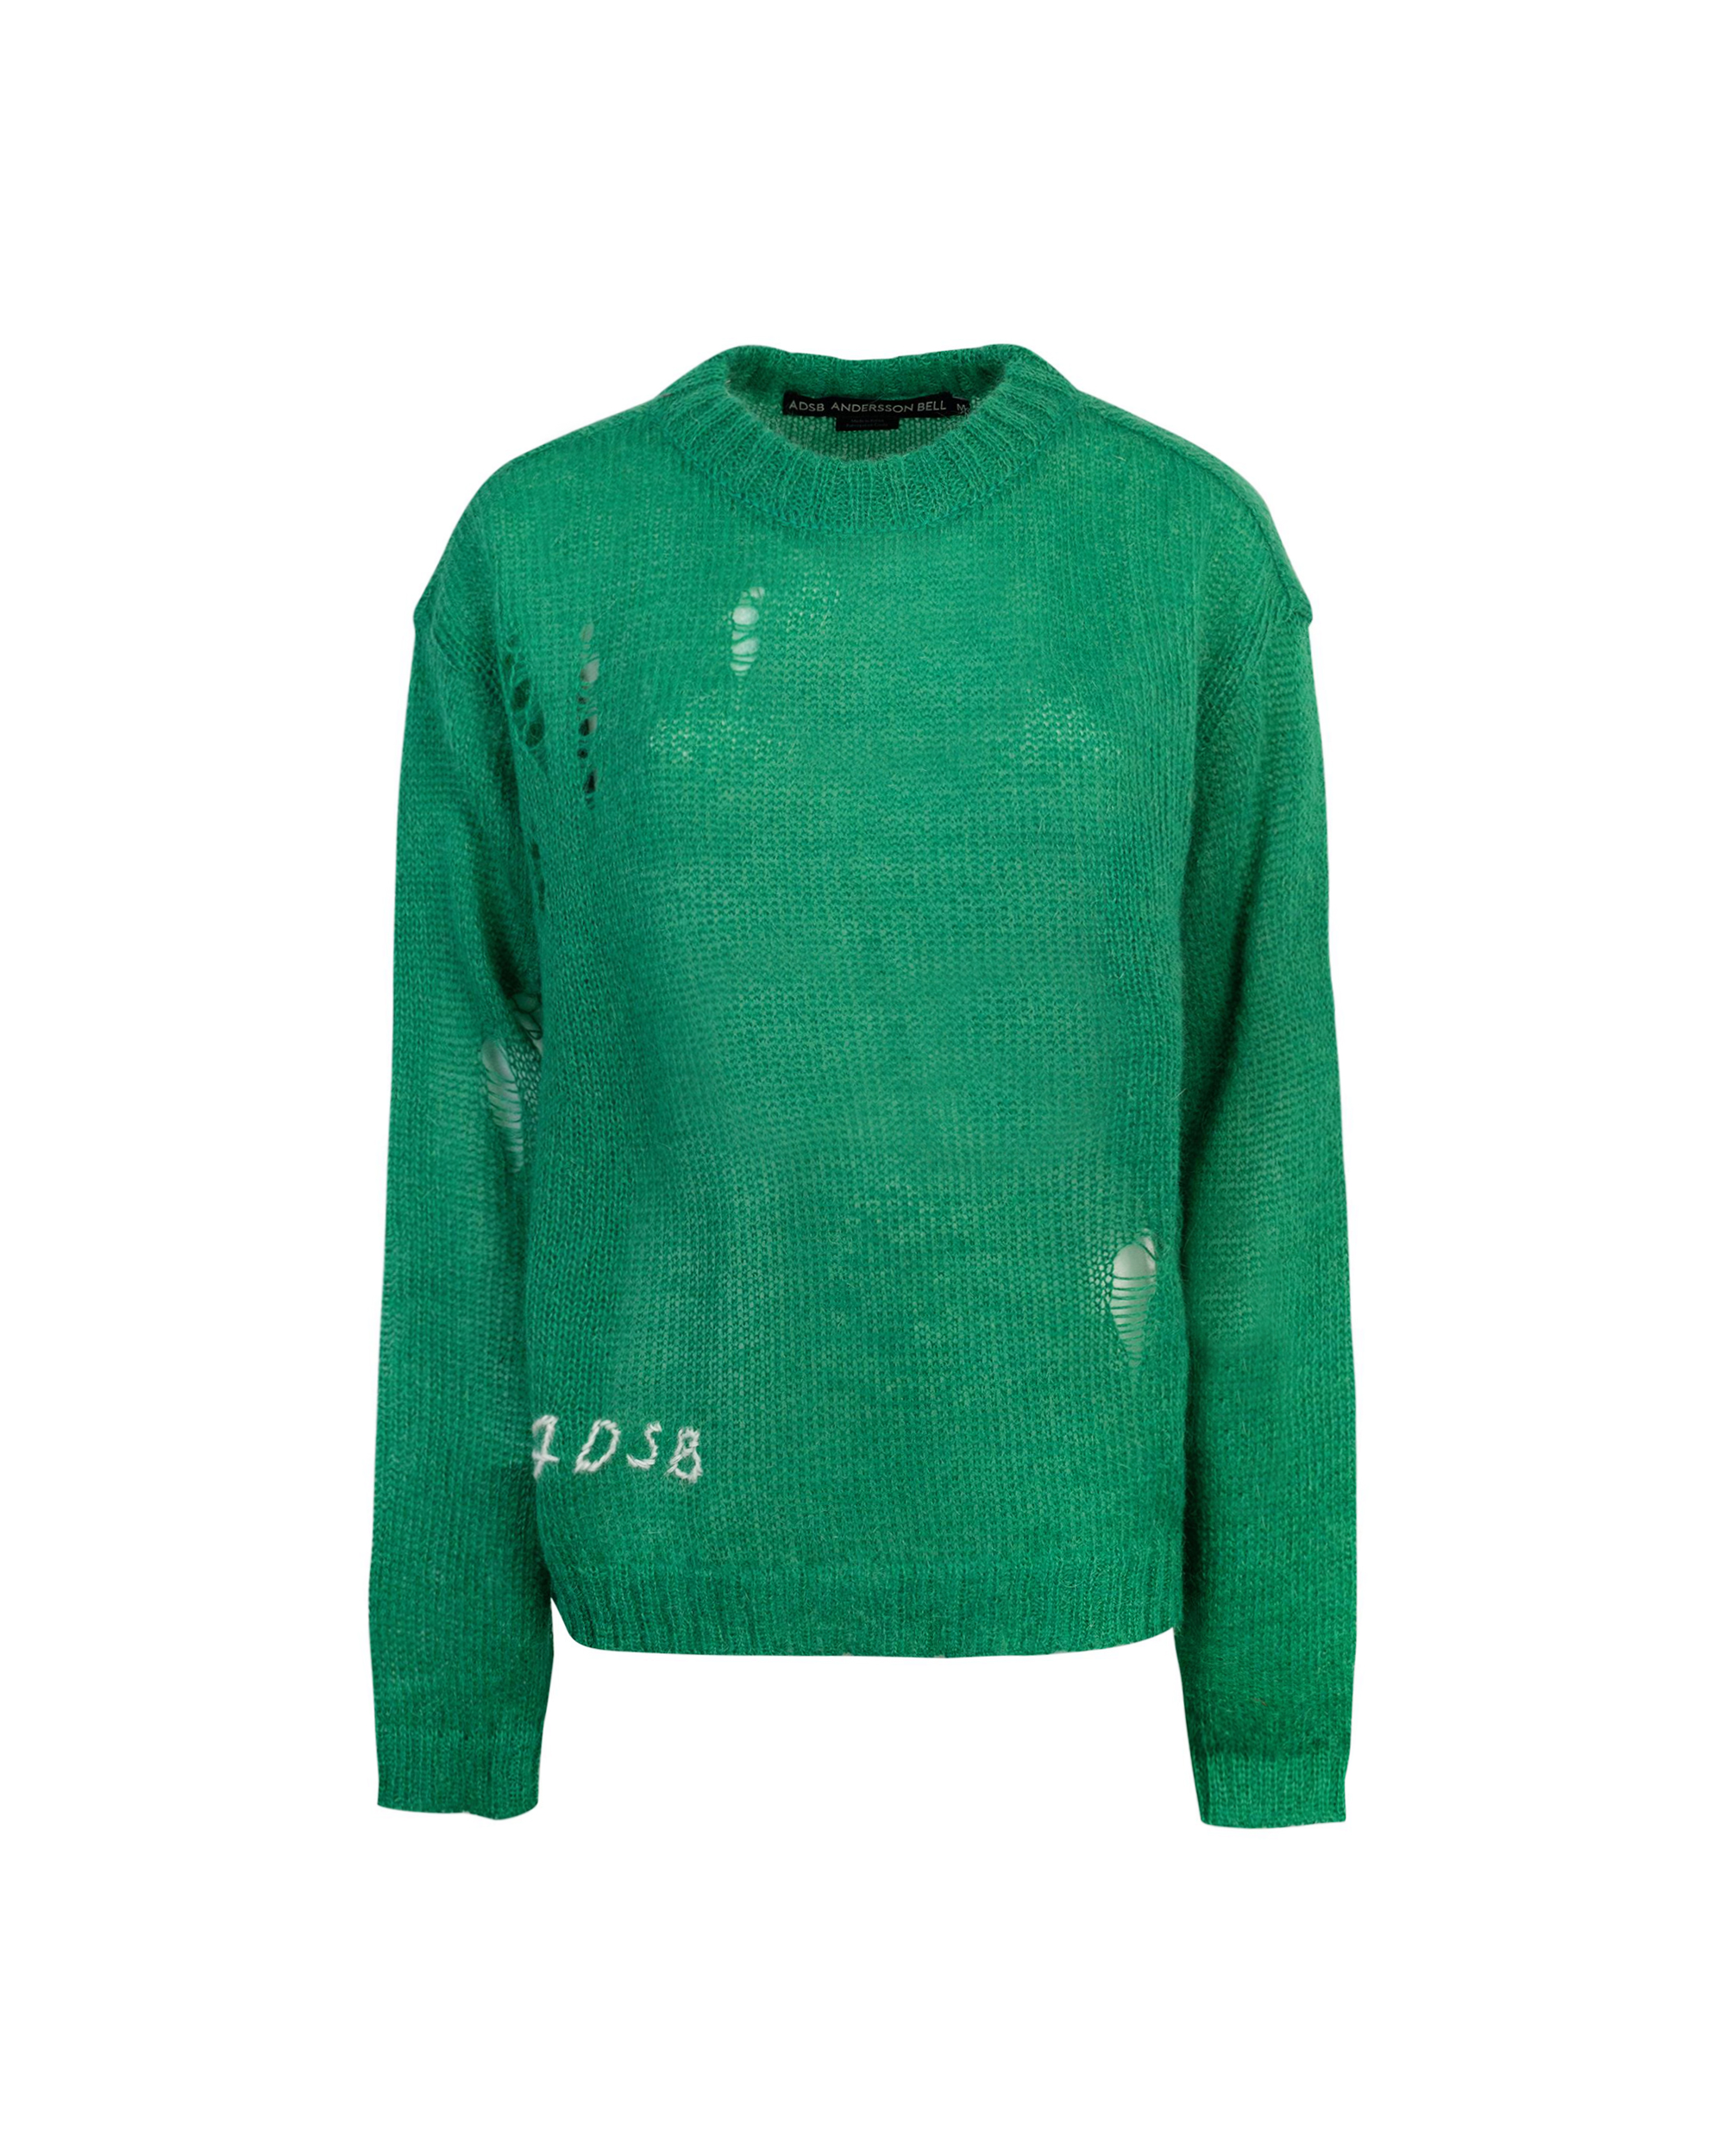 Shop Andersson Bell Green Adsb Shirt